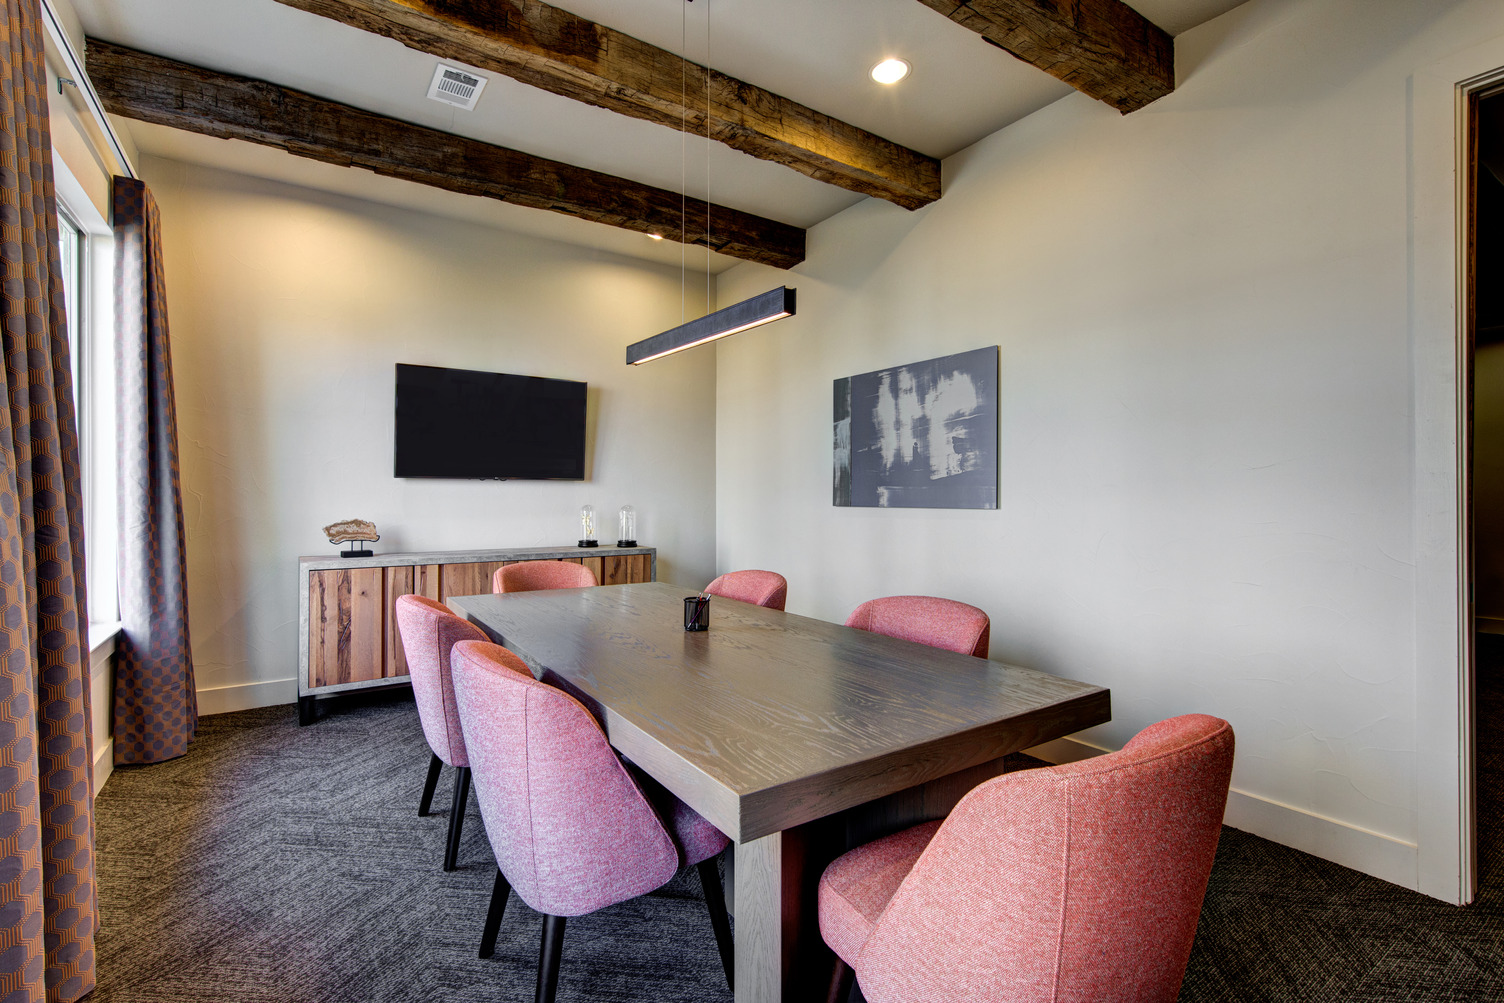 Conference room with large meeting table and wall mounted TV